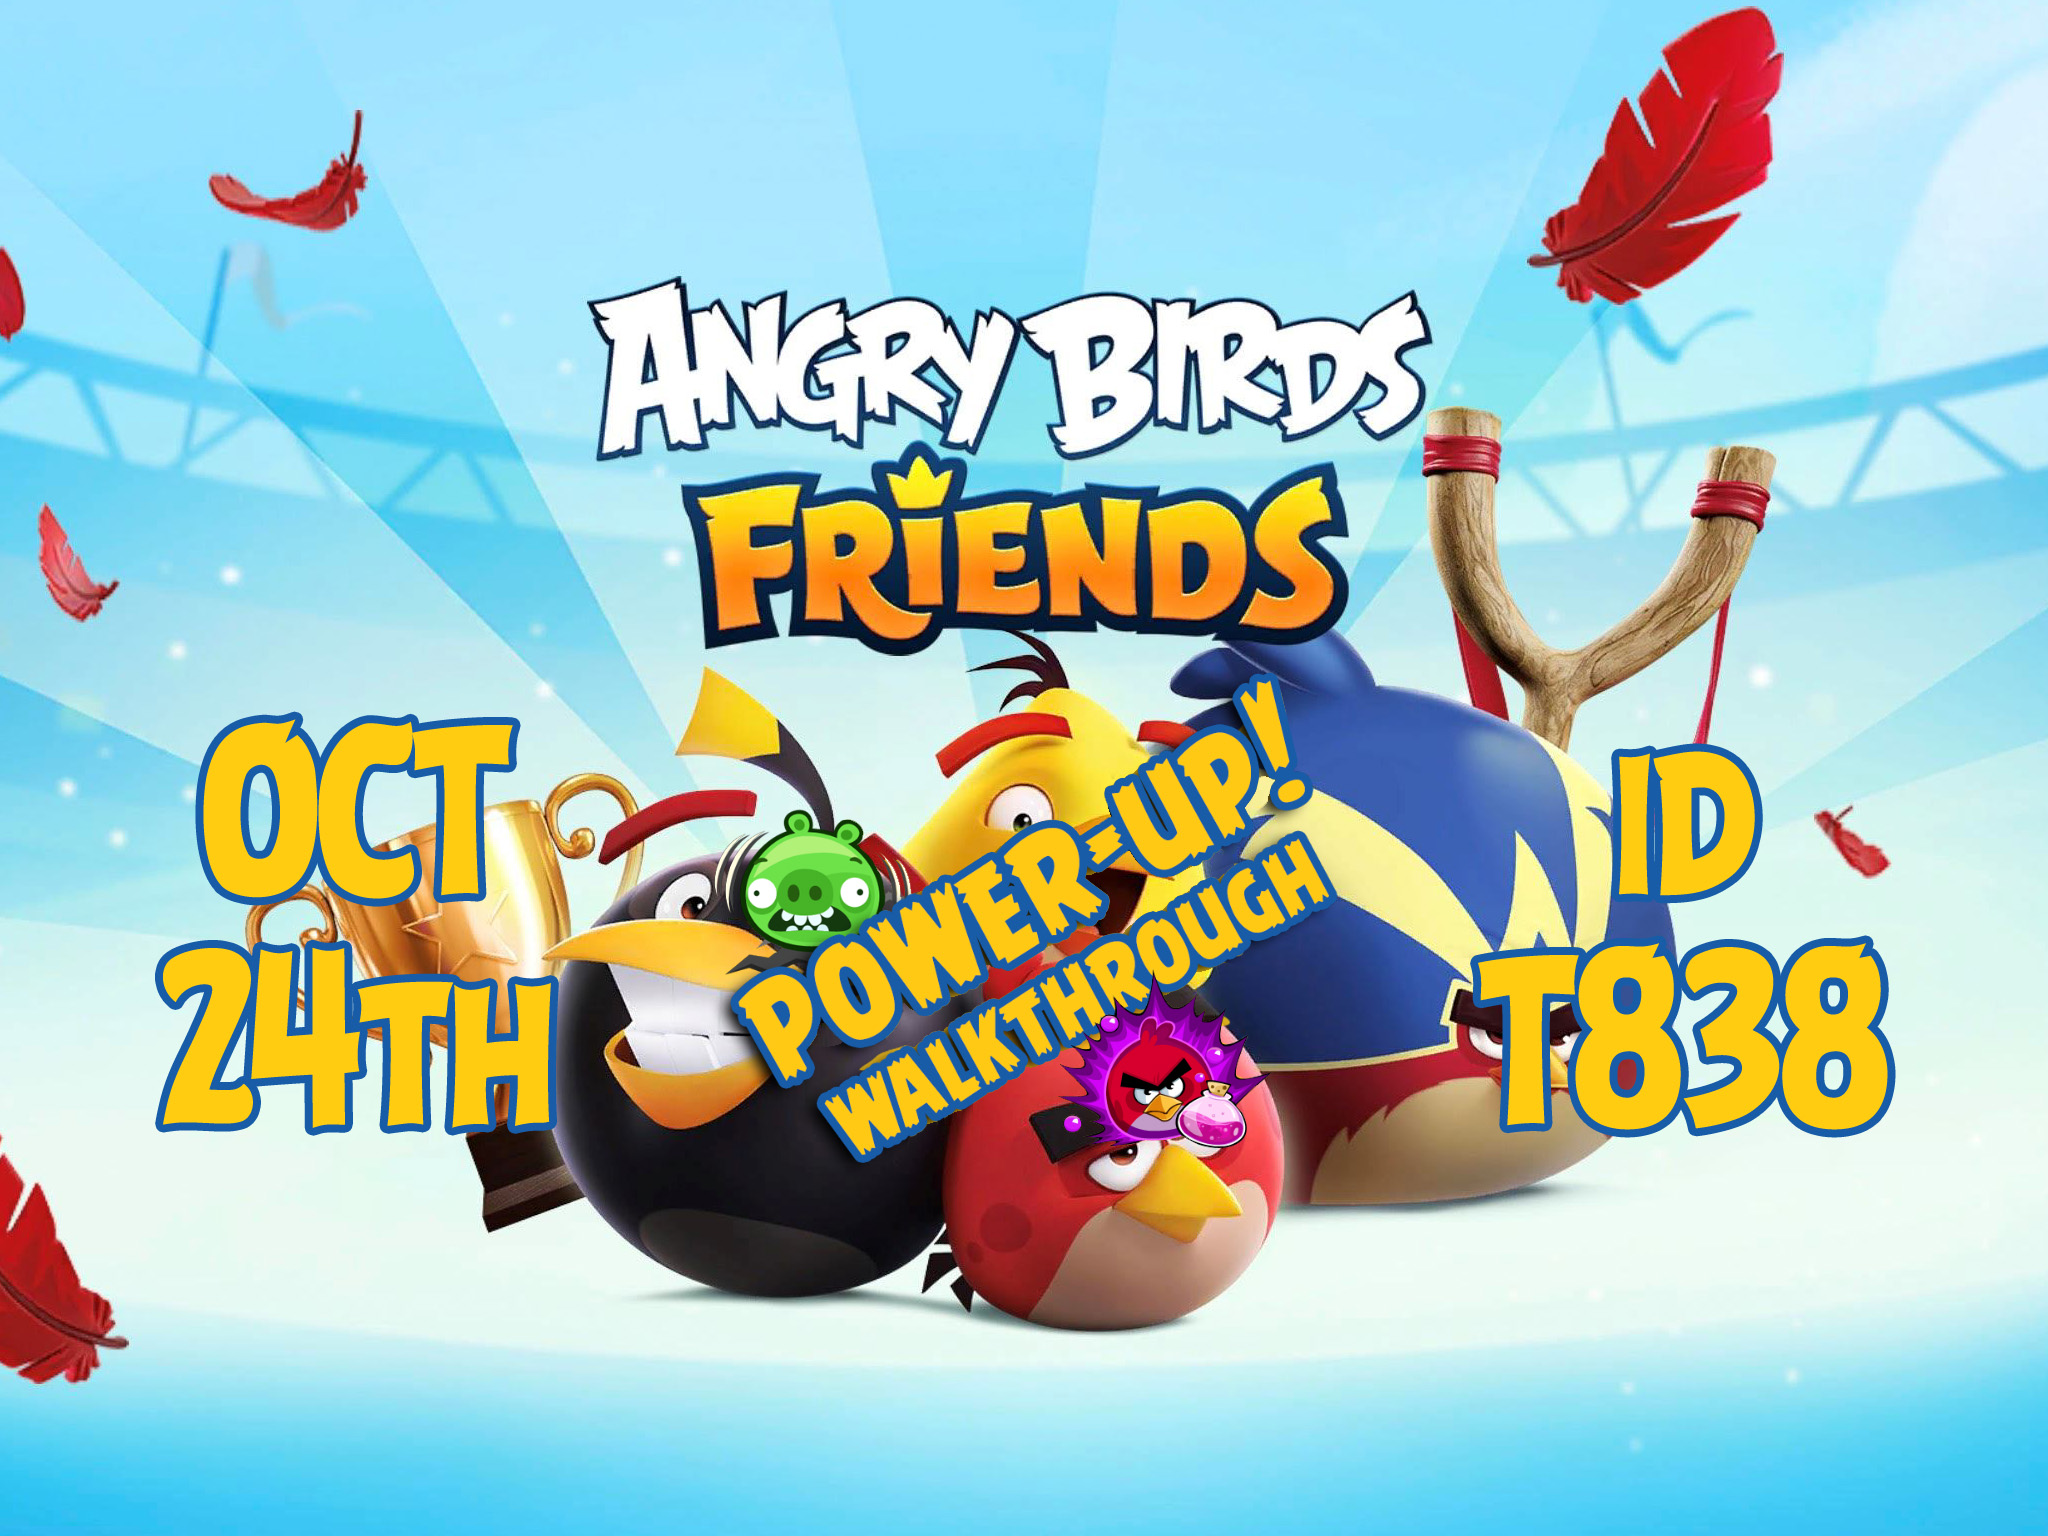 Angry-Birds-Friends-Tournament-T838-Feature-Image-PU